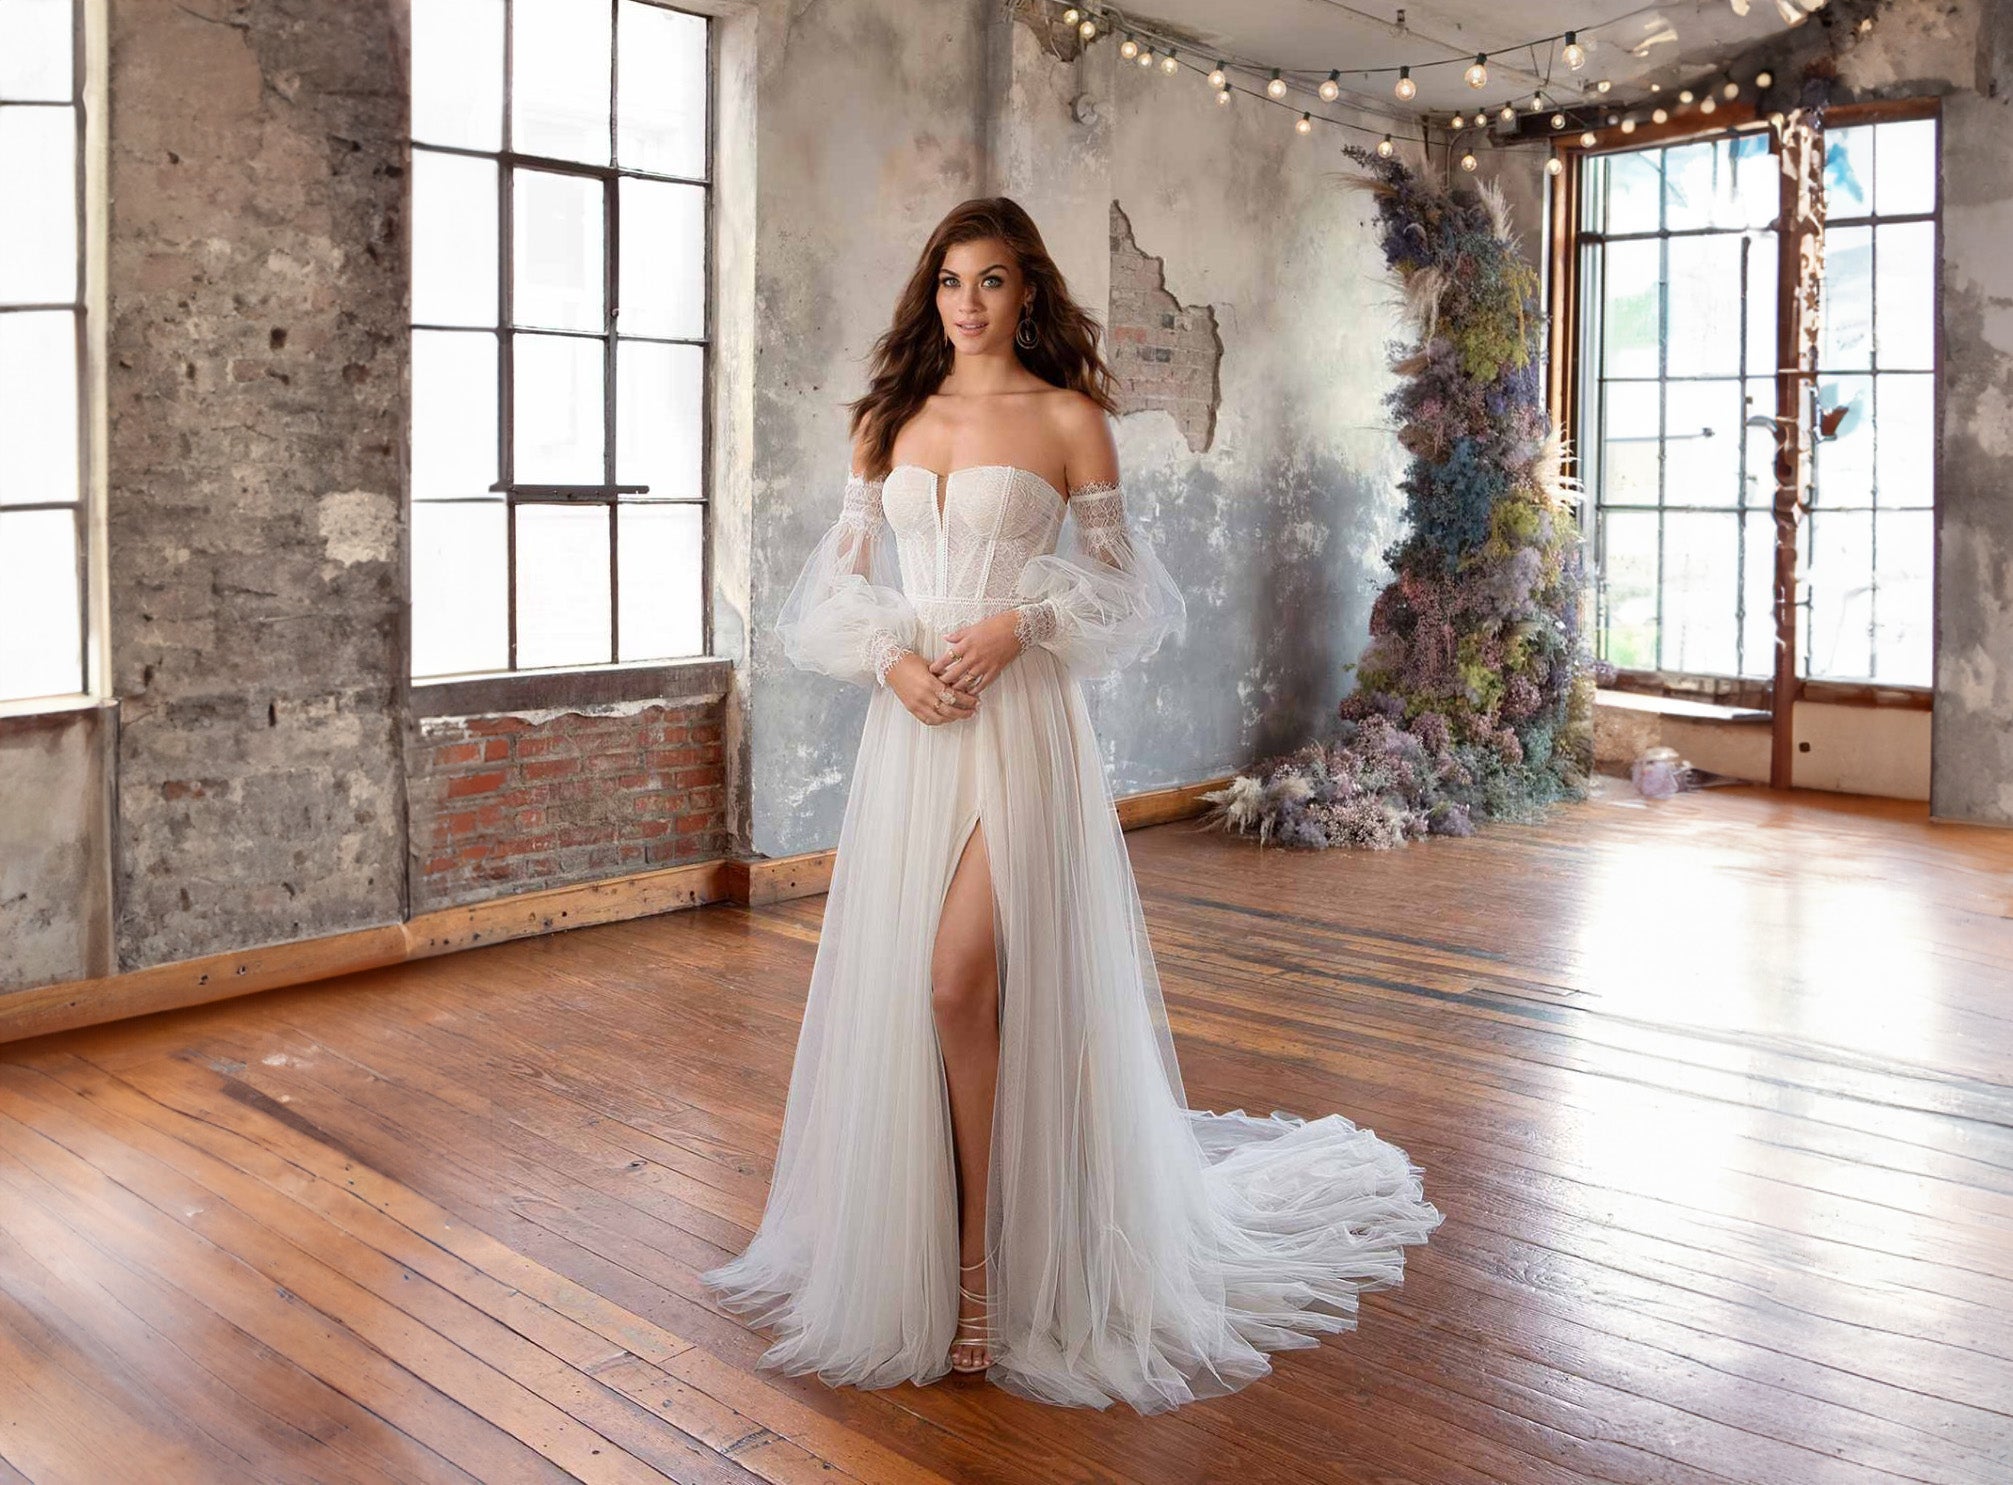 Here's The Gorgeous New Collection That Everyone Will Be Talking About —  Galia Lahav Fall 2019 “Alegria” Couture Bridal Collection | Wedding  Inspirasi | Bell sleeve wedding dress, Dreamy wedding dress, Bridal gowns